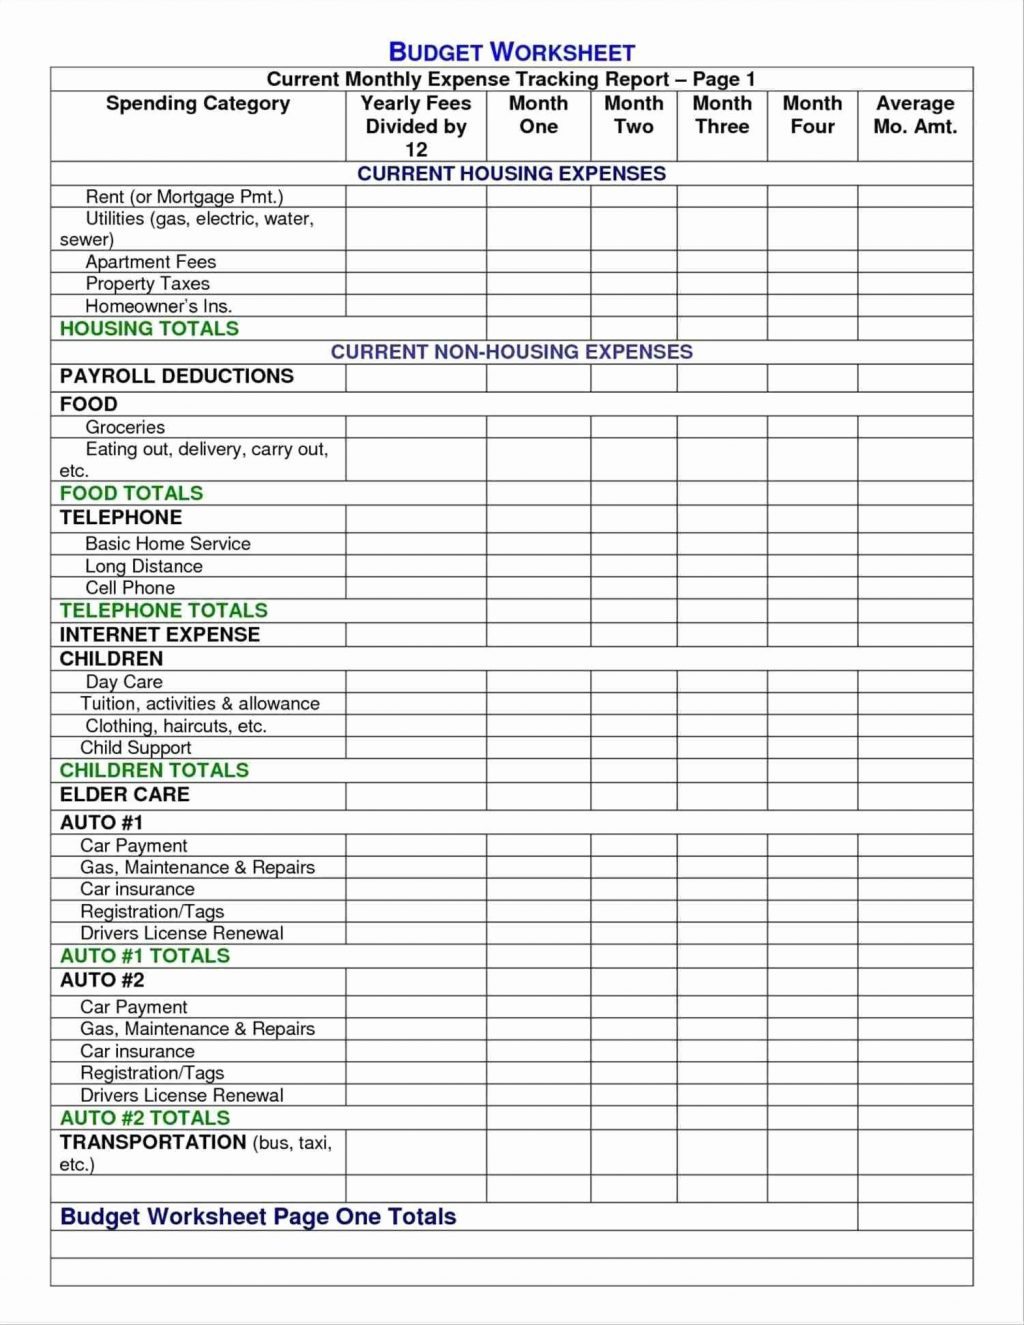 Small Food Business Spreadsheet Within Small Food Businesseadsheet Sheet Cost Inventory Inspirational